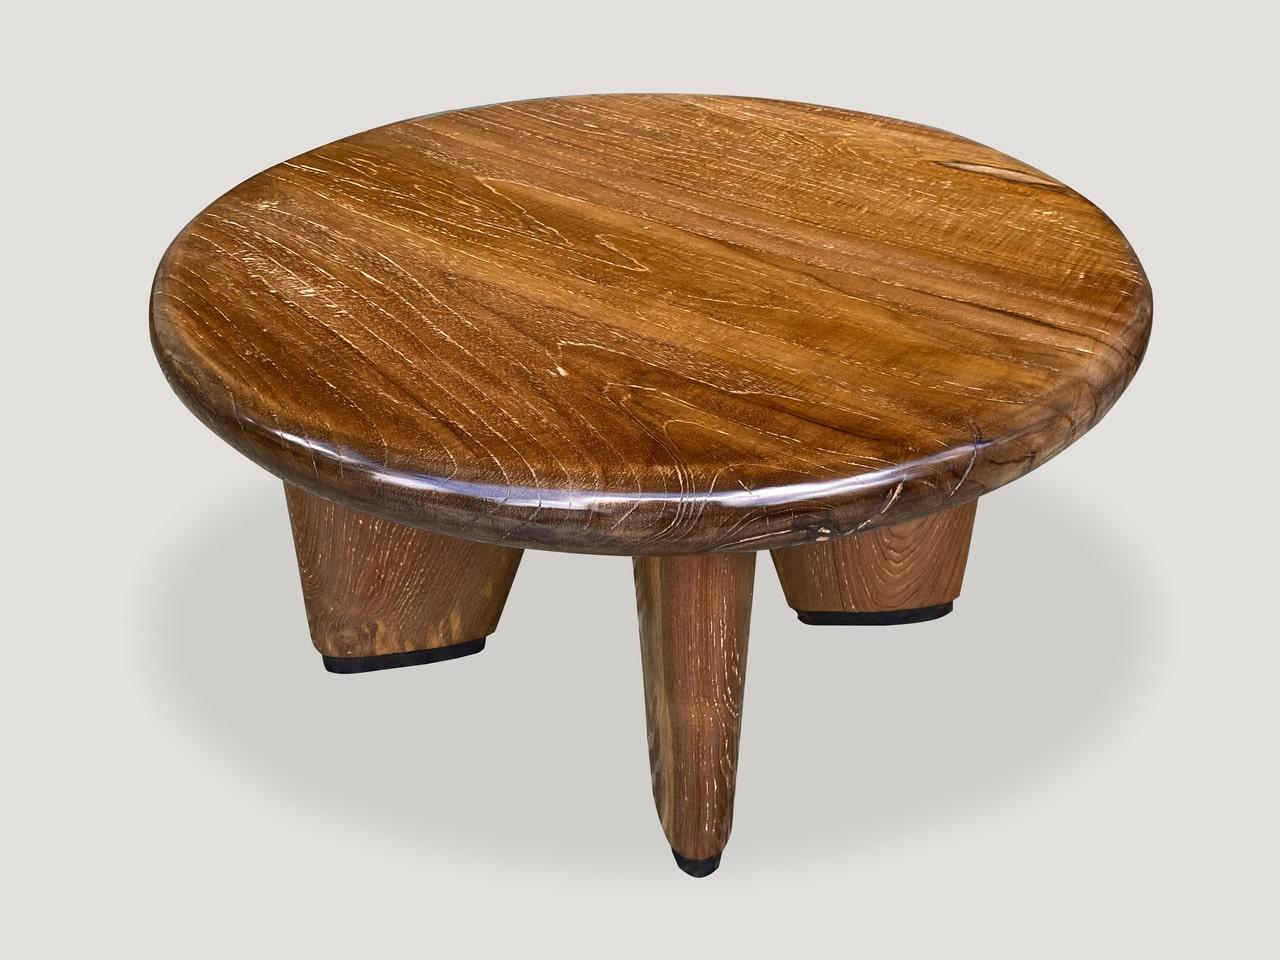 Andrianna Shamaris Midcentury Couture Teak Wood Low Profile Round Coffee Table In Excellent Condition For Sale In New York, NY